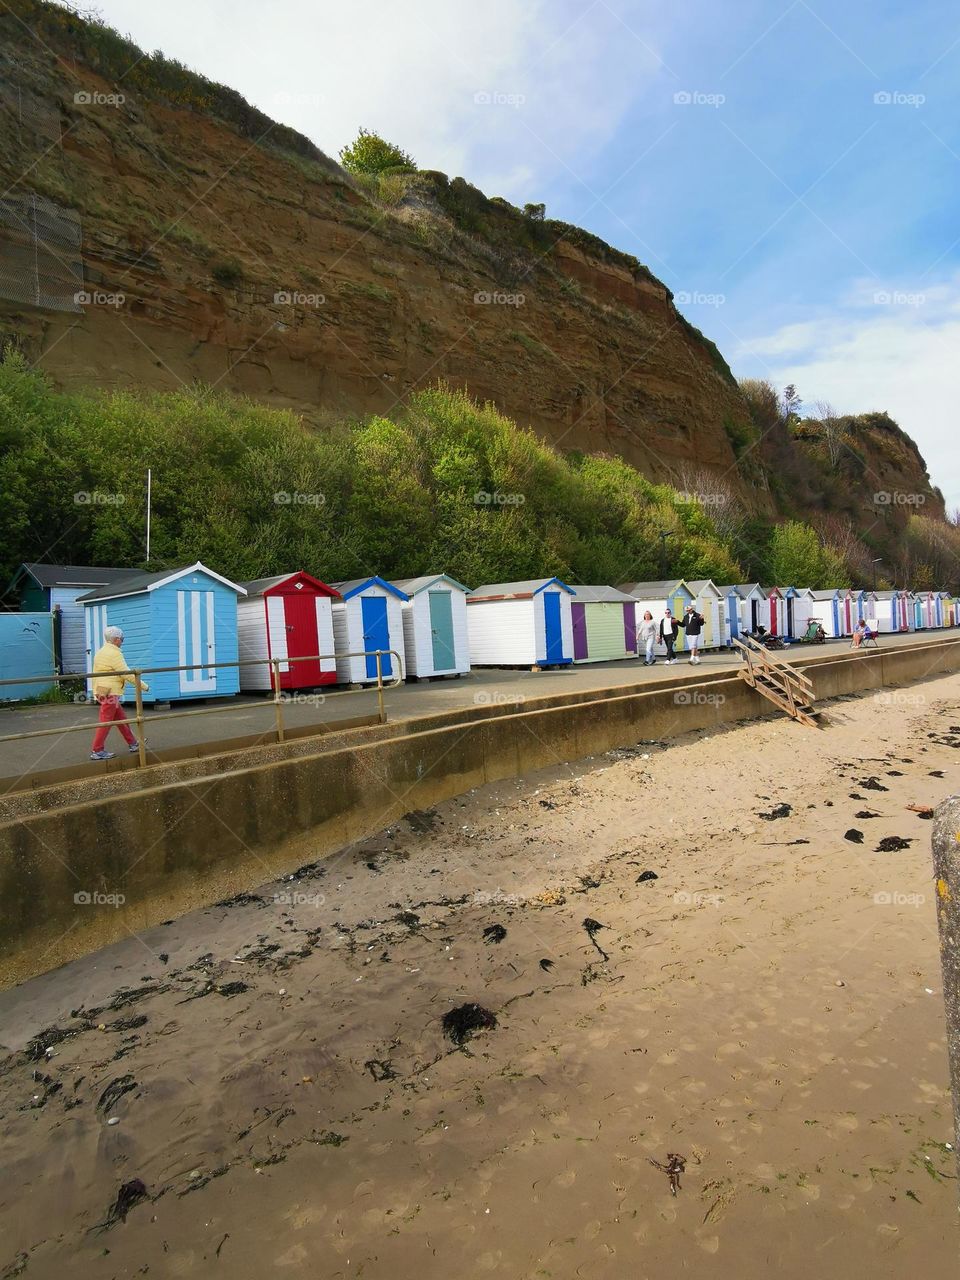 The first sunny spring days in England. Sea shore. Bright beach houses are waiting for vacationers. April. Beach. The beach season will start soon.